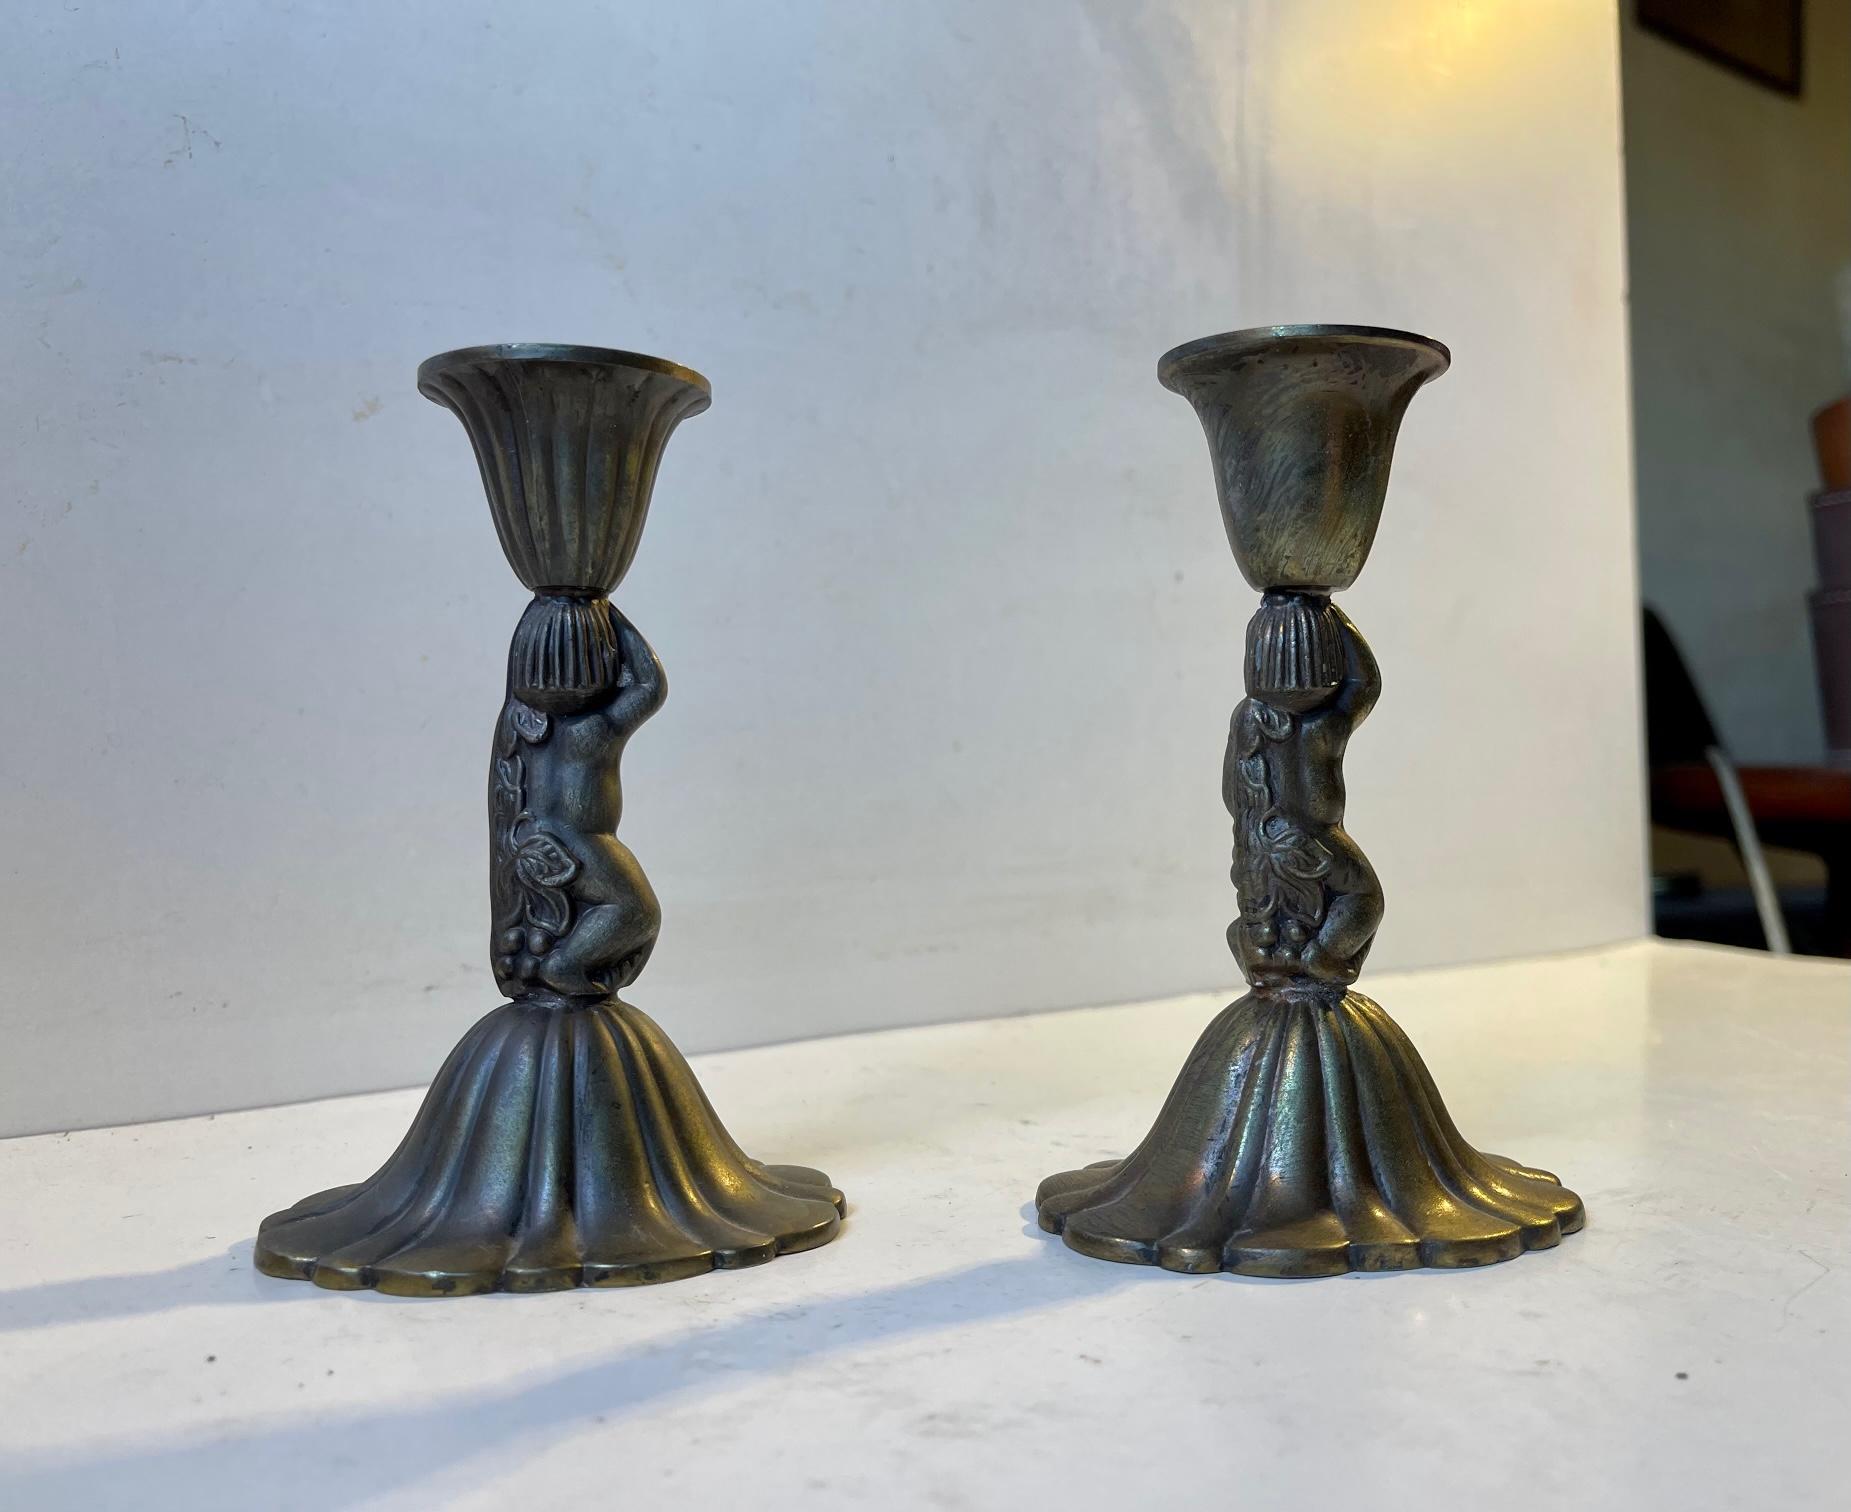 Vintage Italian Candleholders with Cherubs, 1940s In Good Condition For Sale In Esbjerg, DK